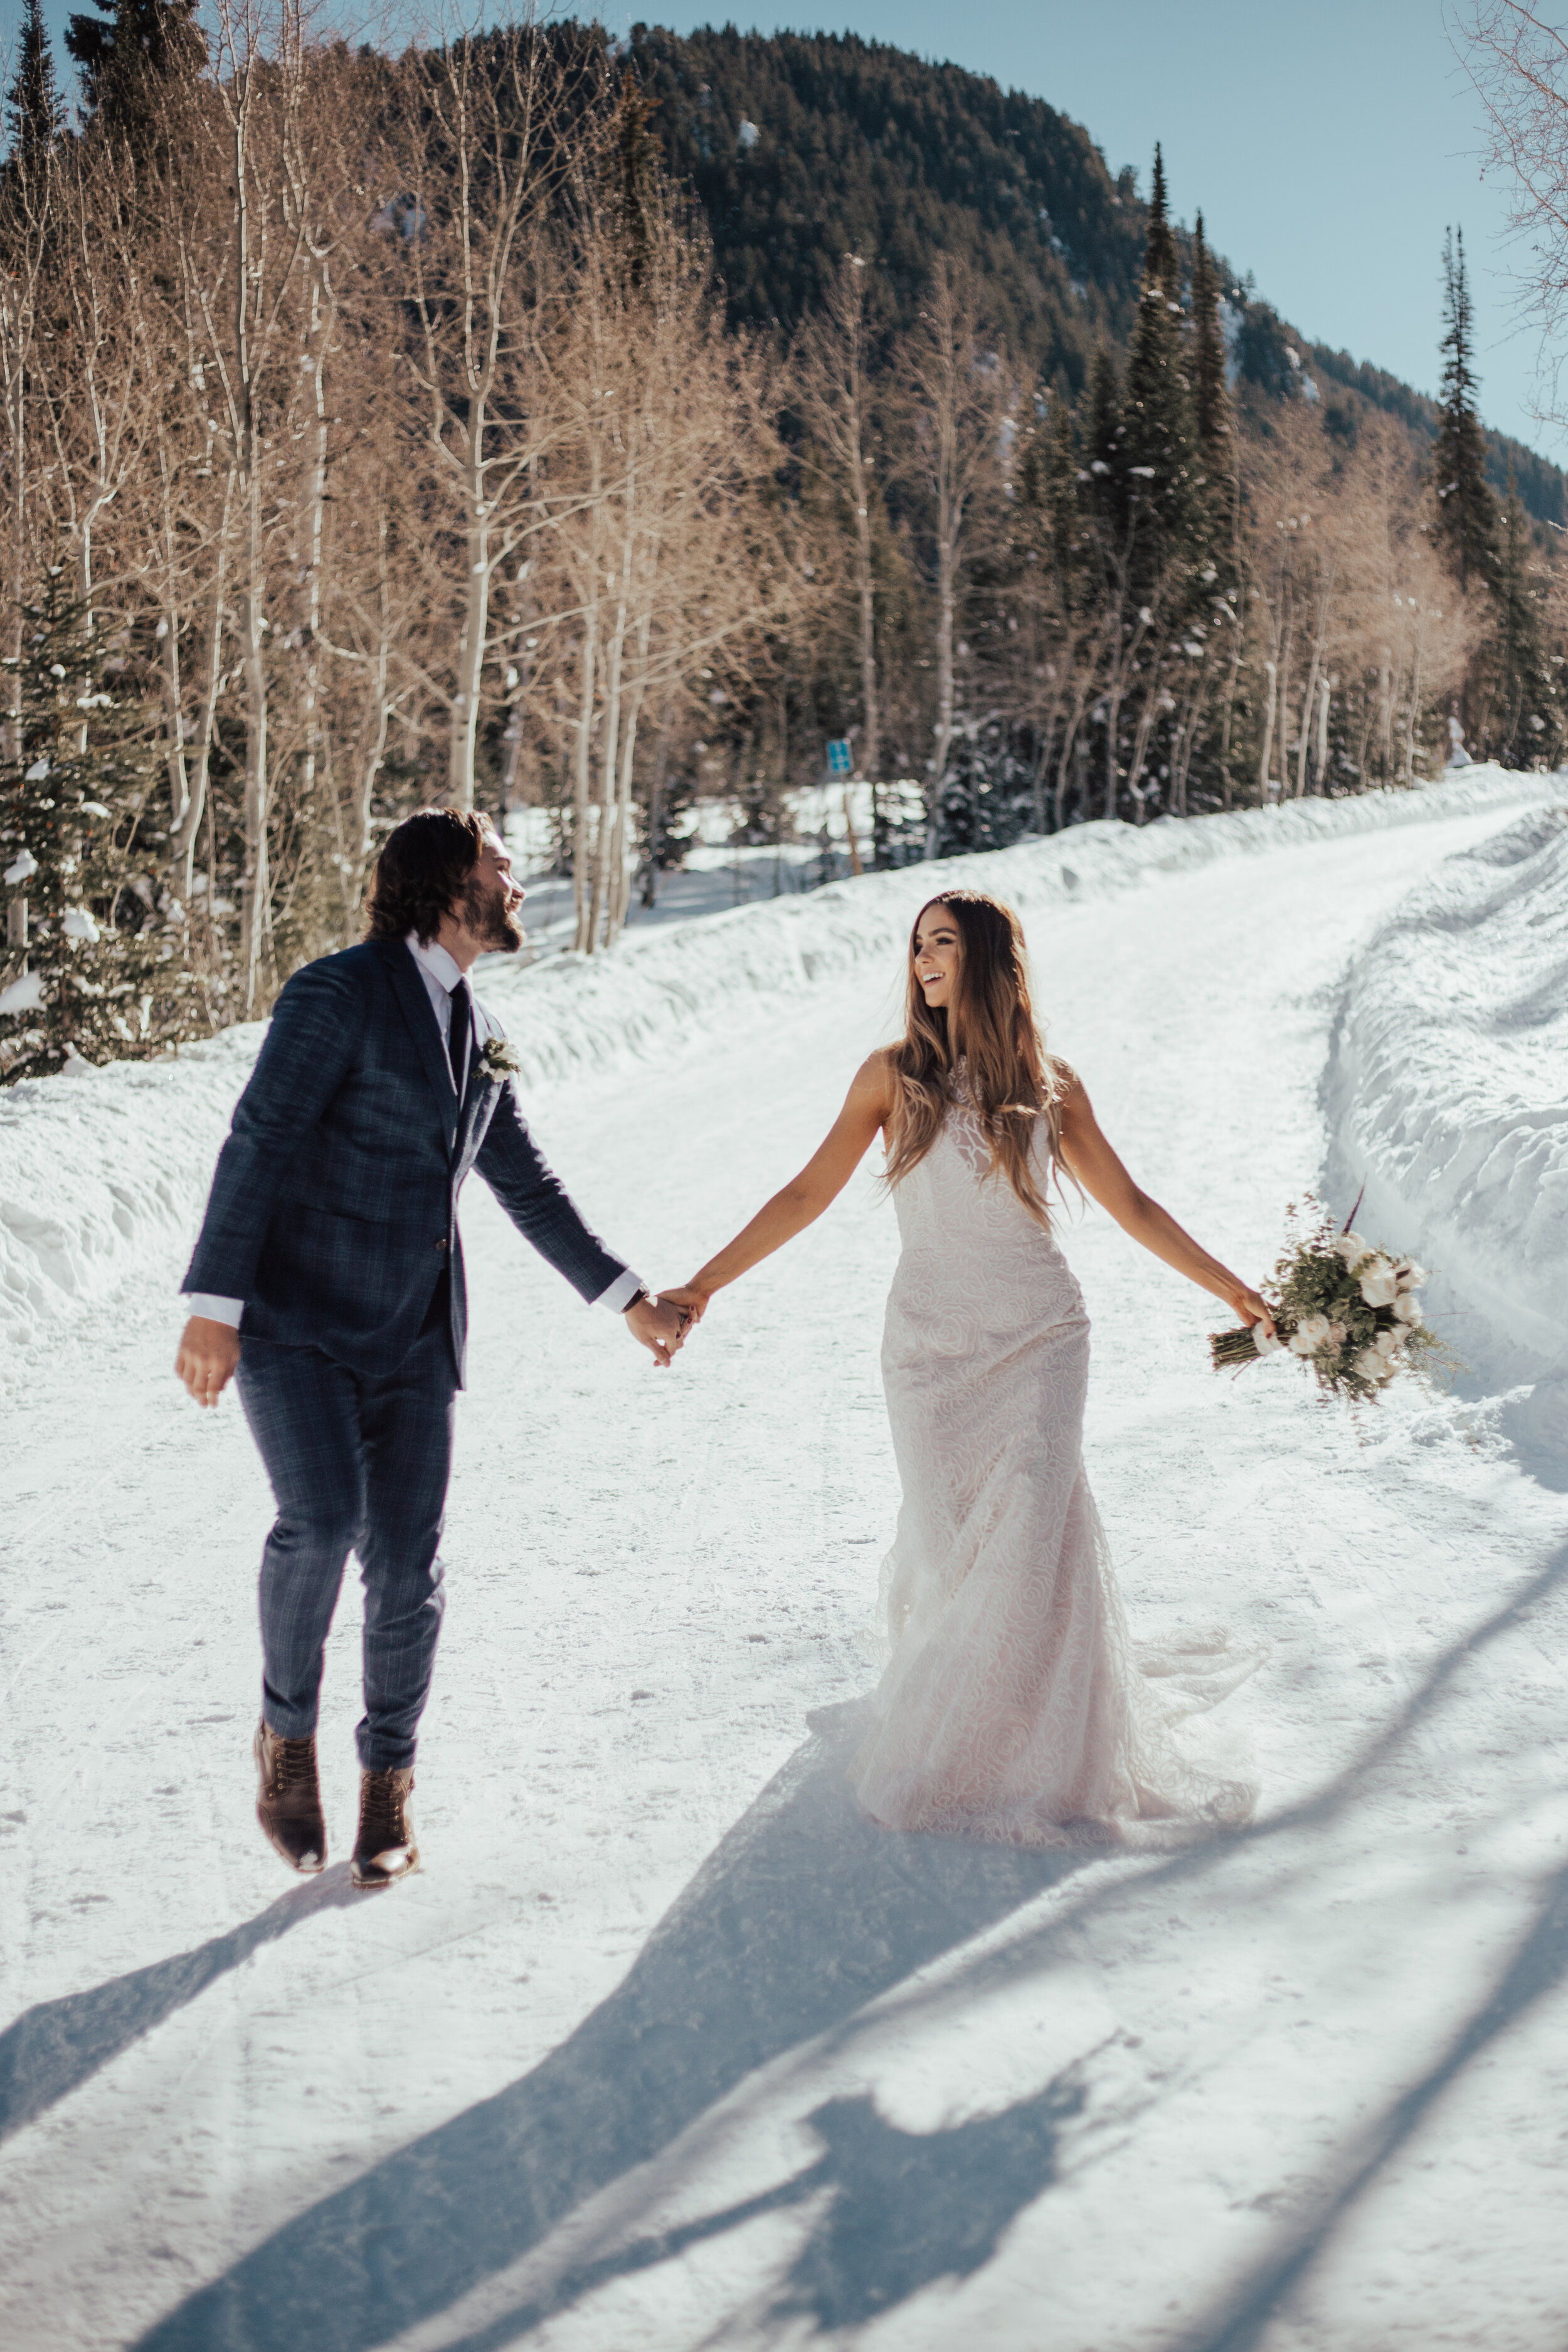 Winter mountain snowy bridals formal session bride groom sun flare pine trees wedding photos dress beard #bridals #weddingphotos #brideandgroom #utahphotographer #weddingphotographer #winterwedding